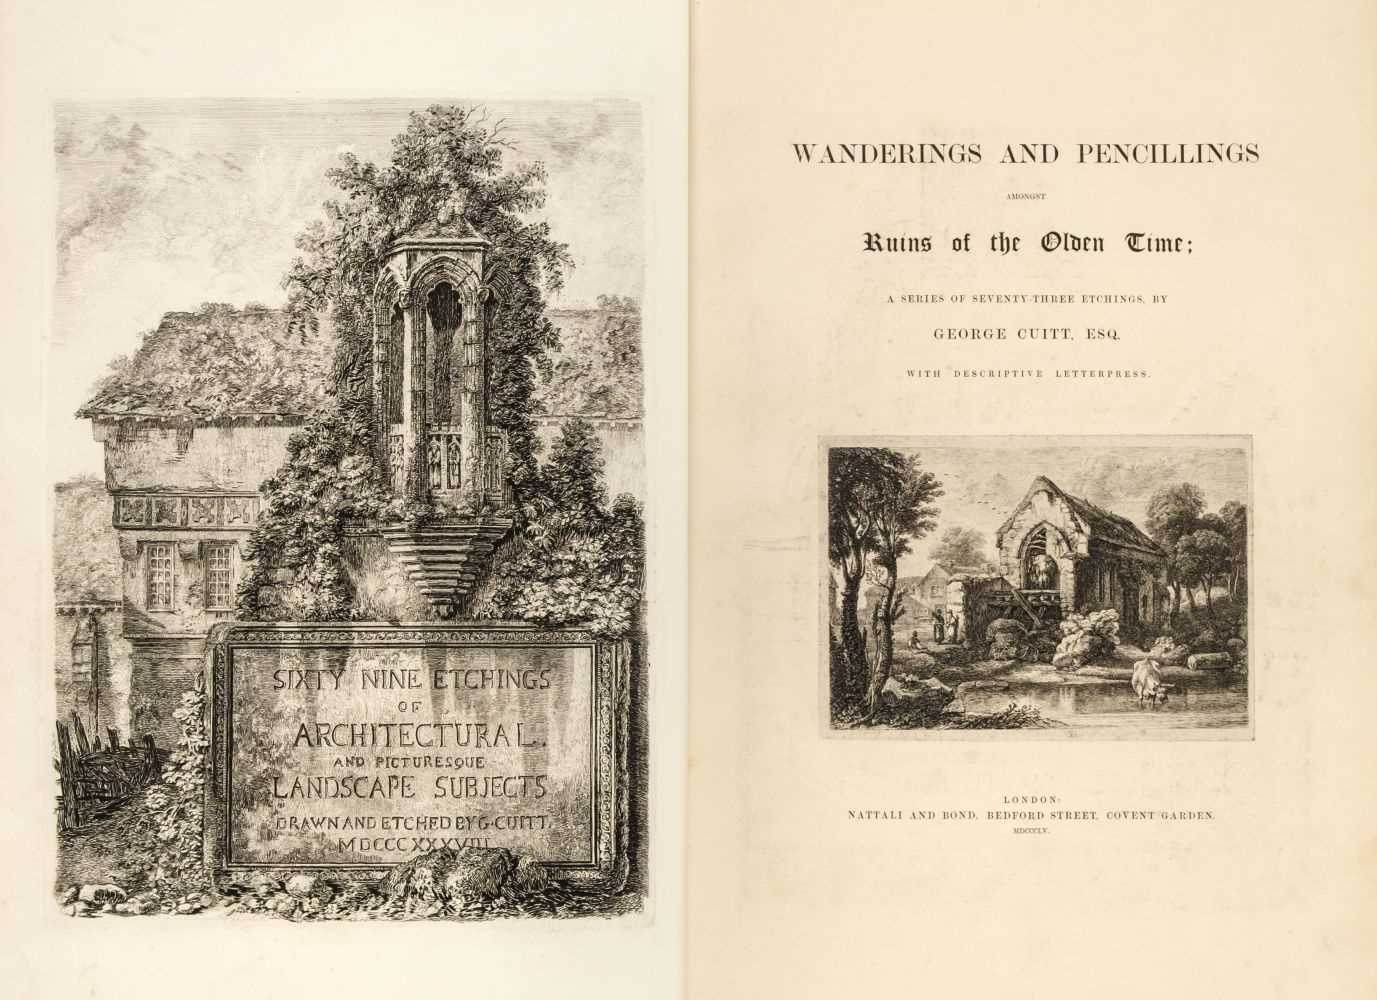 Lot 32 - Cuitt (George). Wanderings and Pencillings Amongst the Ruins of the Olden Time